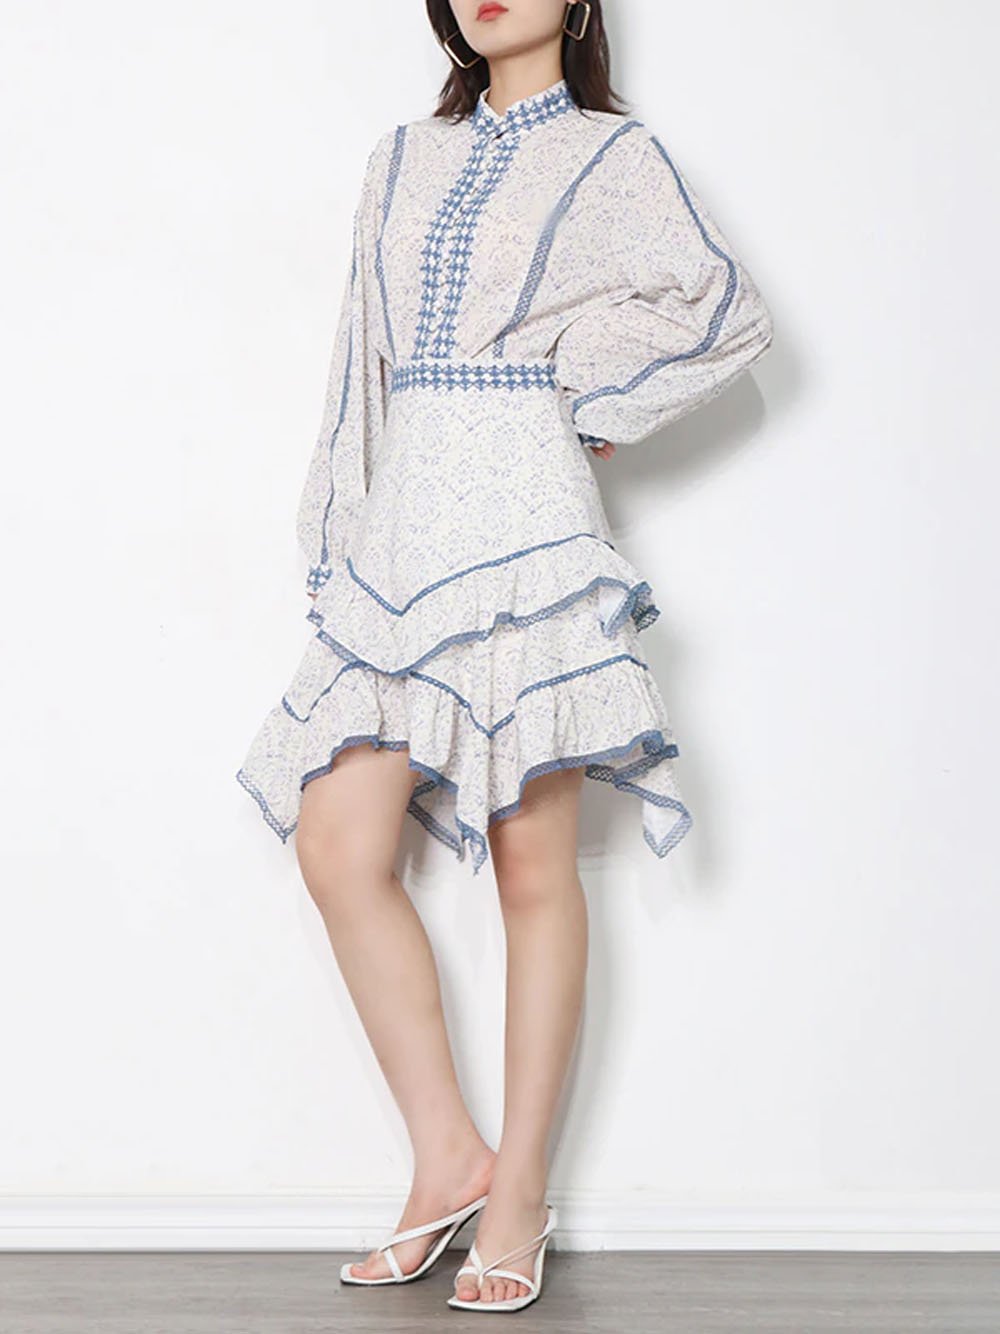 YALETTE Embroidery Top & Skirt